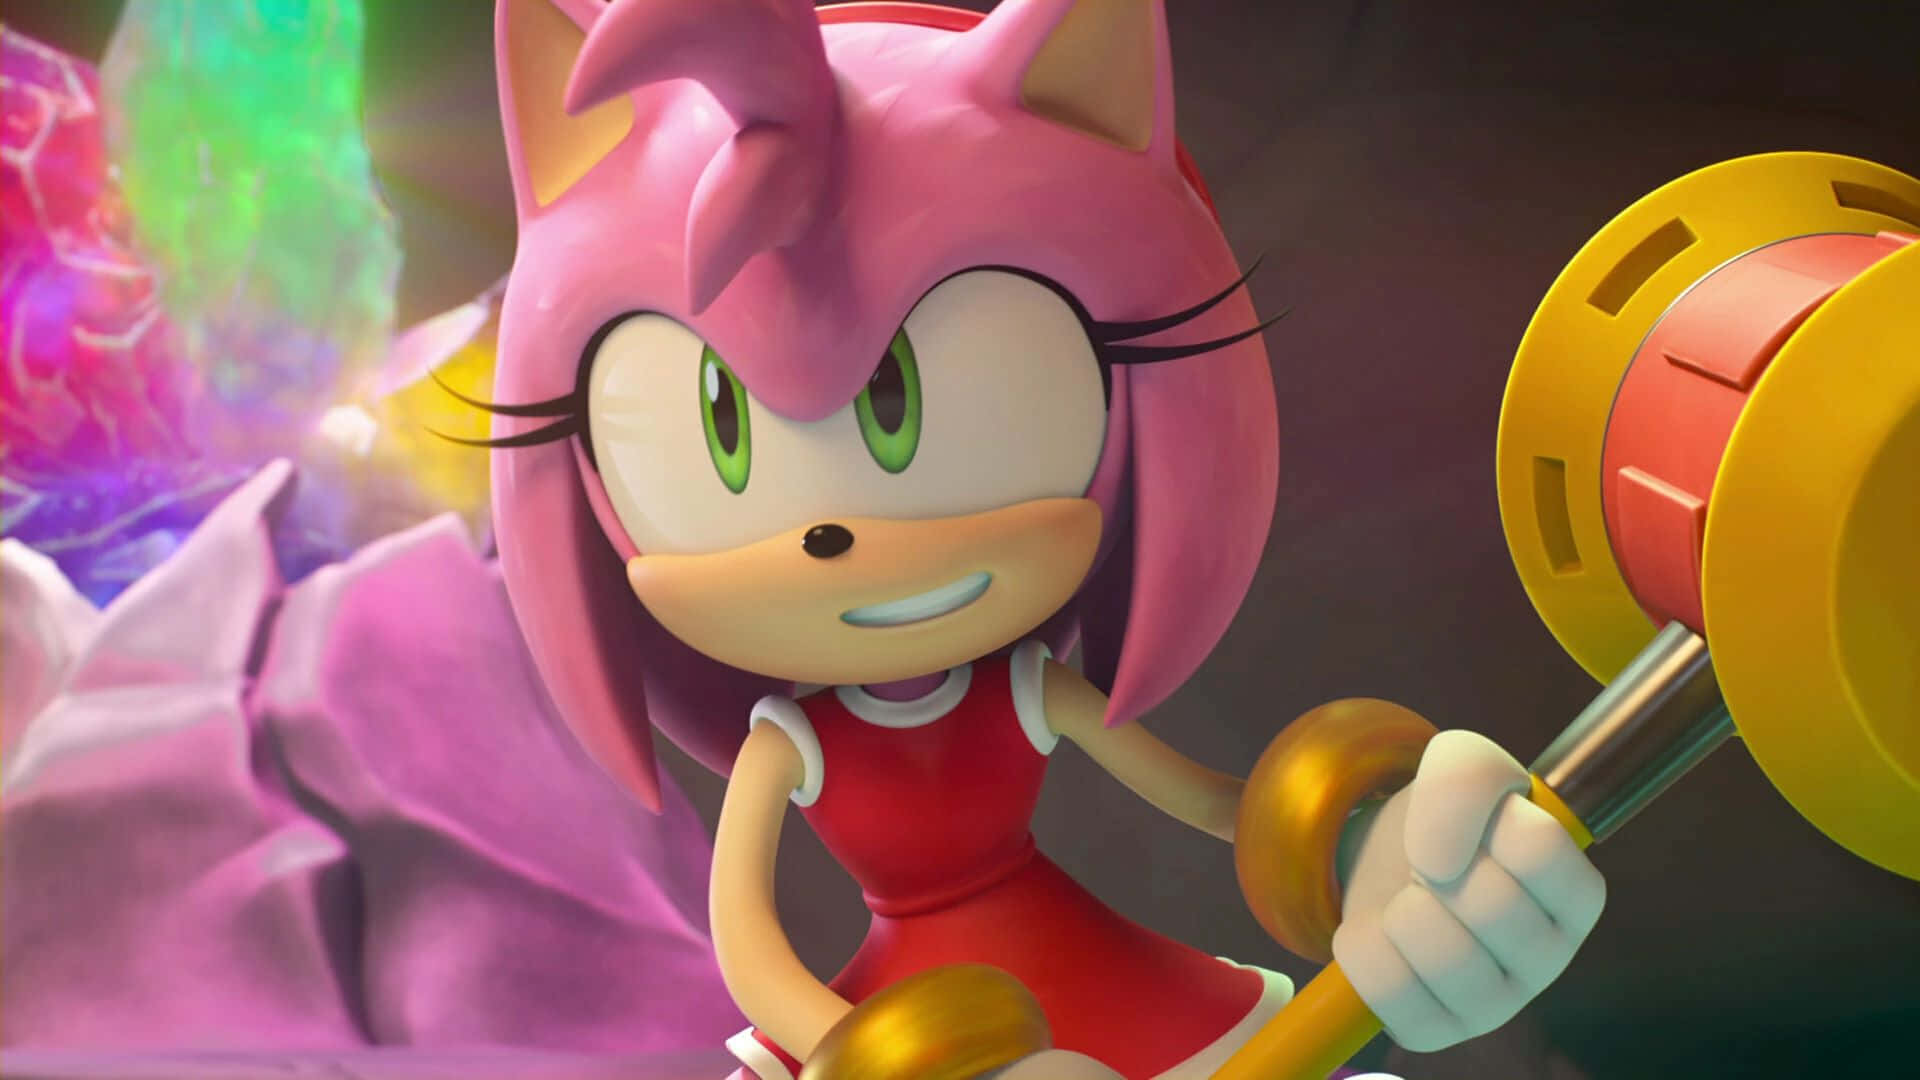 Sonic_ Prime_ Amy_ Rose_ With_ Piko_ Piko_ Hammer Wallpaper